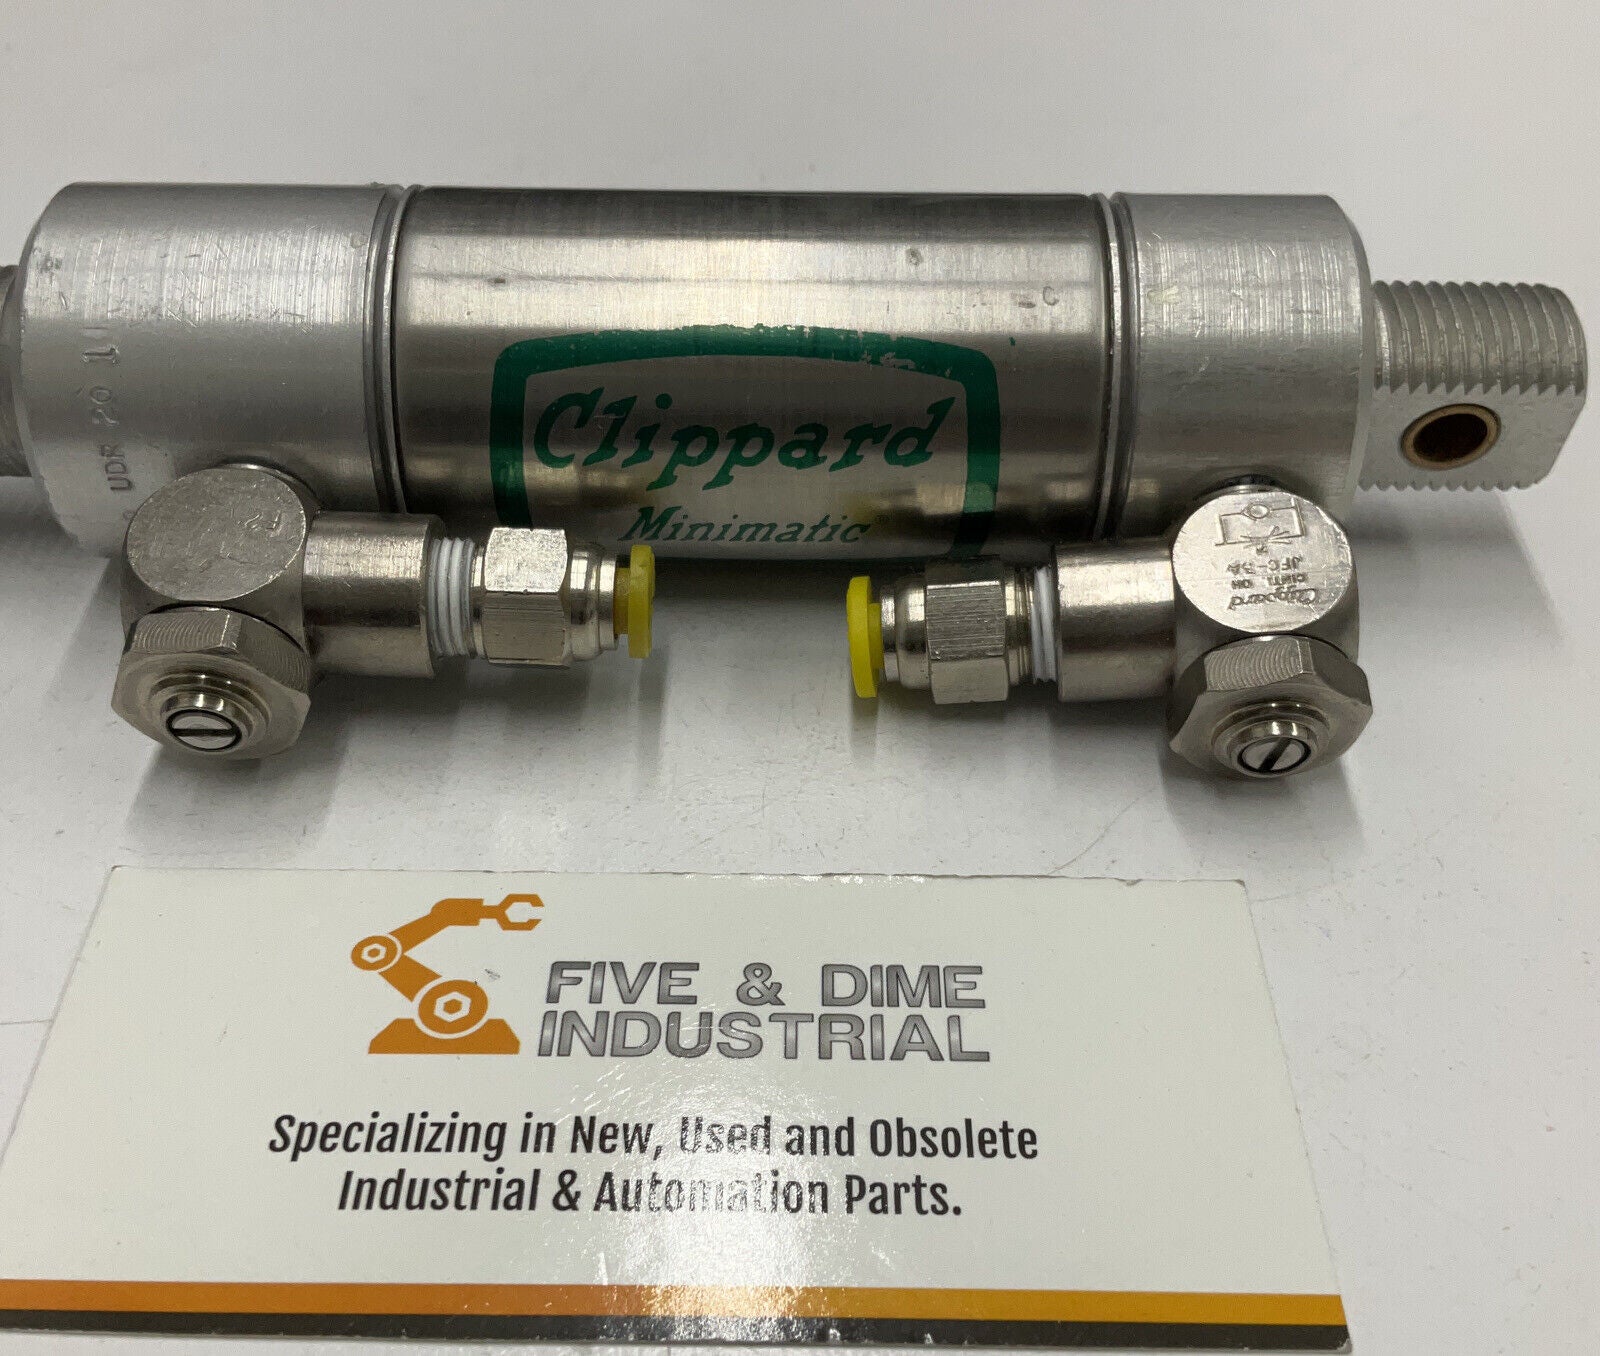 Clippard UDR-2-1 Pneumatic Cylinder 1-1/4" Bore 1" Stroke w/ Fittings (BL192) - 0